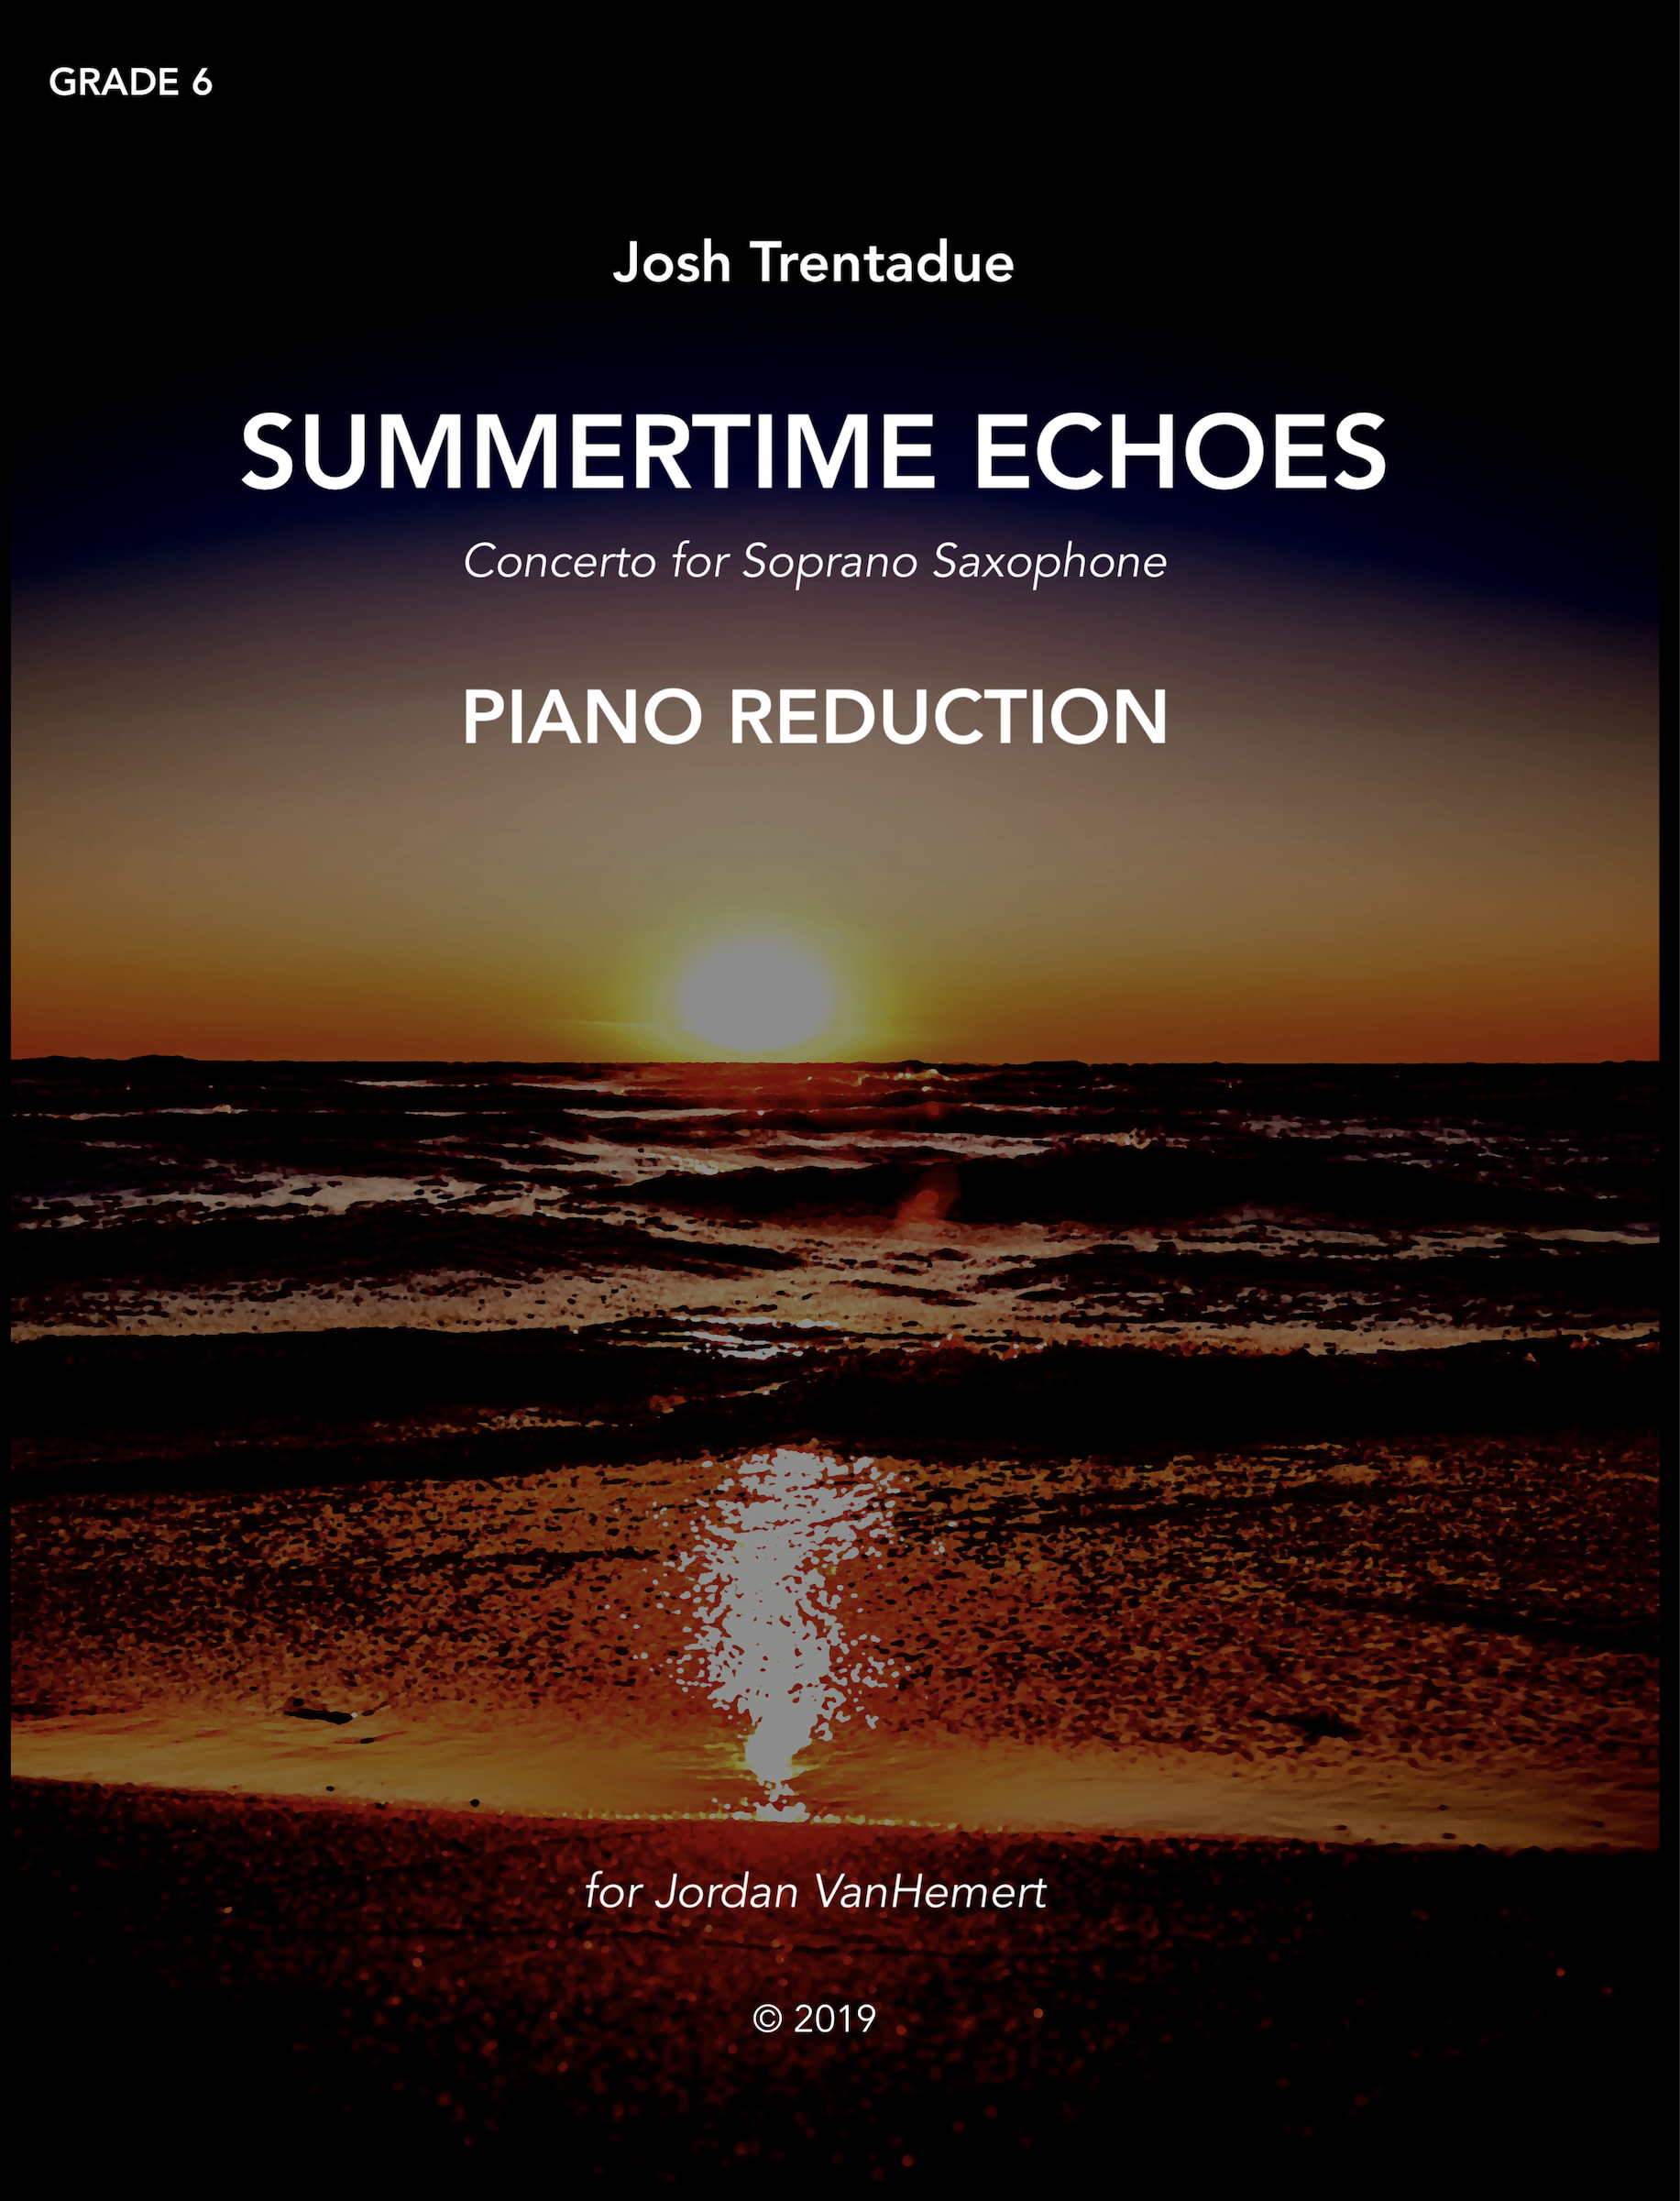 Summertime Echoes (Piano Reduction) by Josh Trentadue